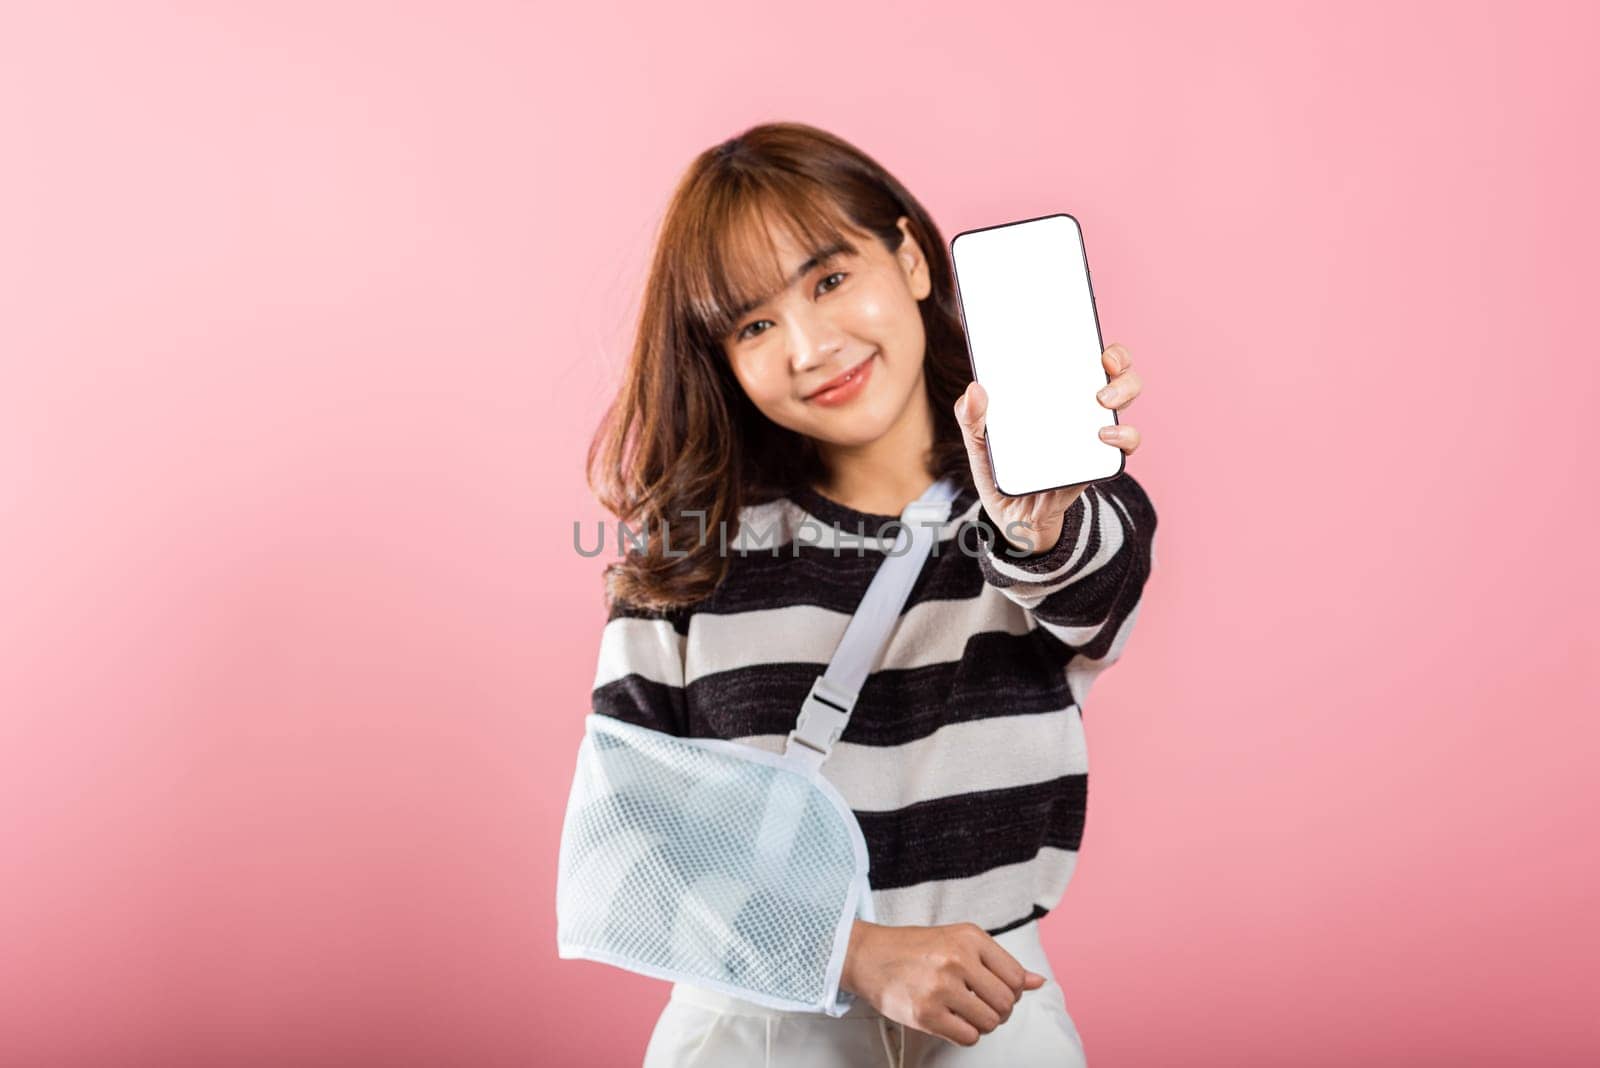 Asian woman with a broken arm, wearing an arm splint, smiles while displaying her smartphone screen by Sorapop